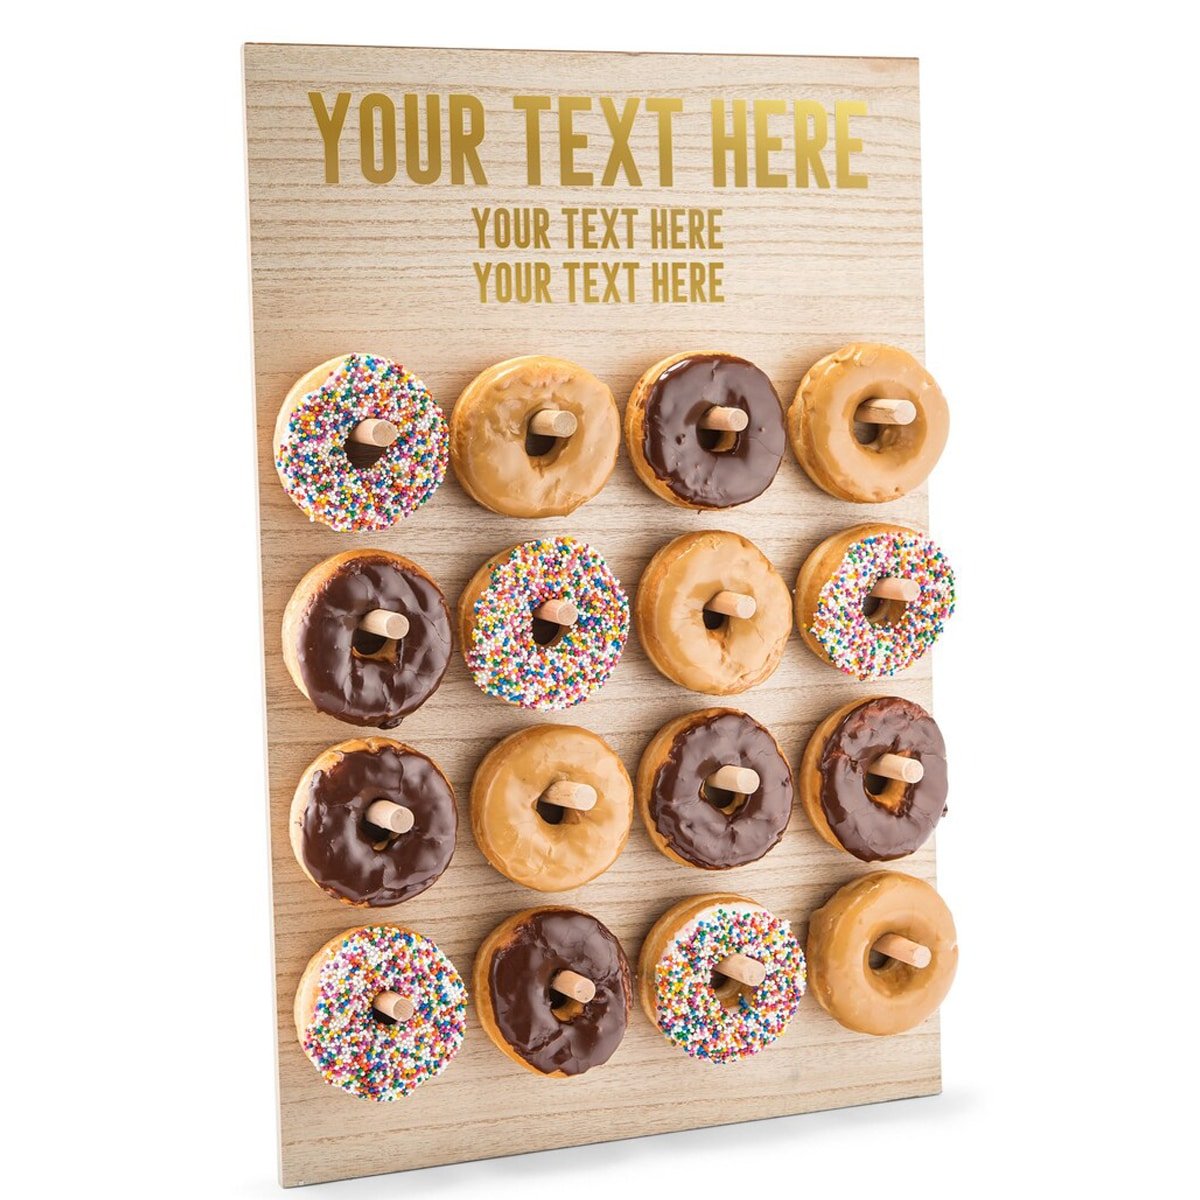 A custom donut wall for a party favor display found on Etsy.